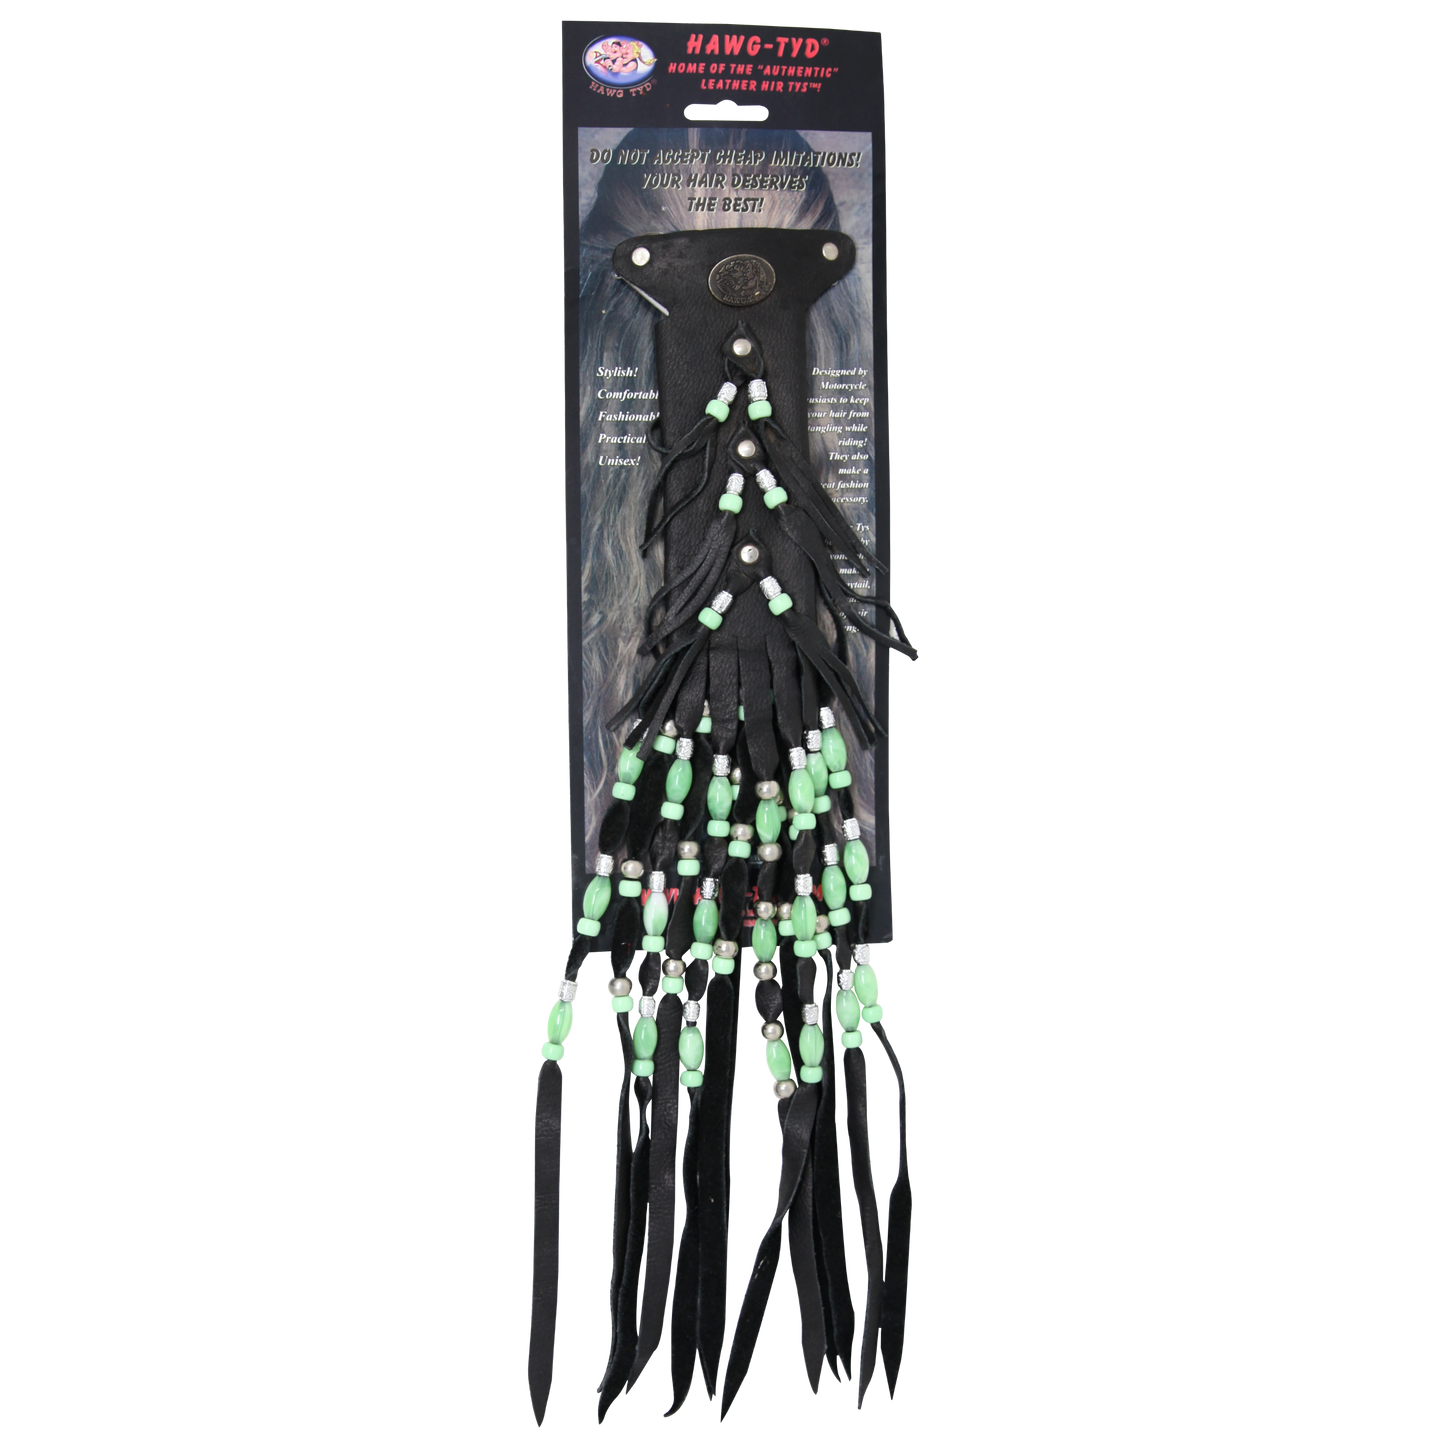 HTGreen "Hawg Tyd" The Authentic Leather Hair TYS - Green Beads